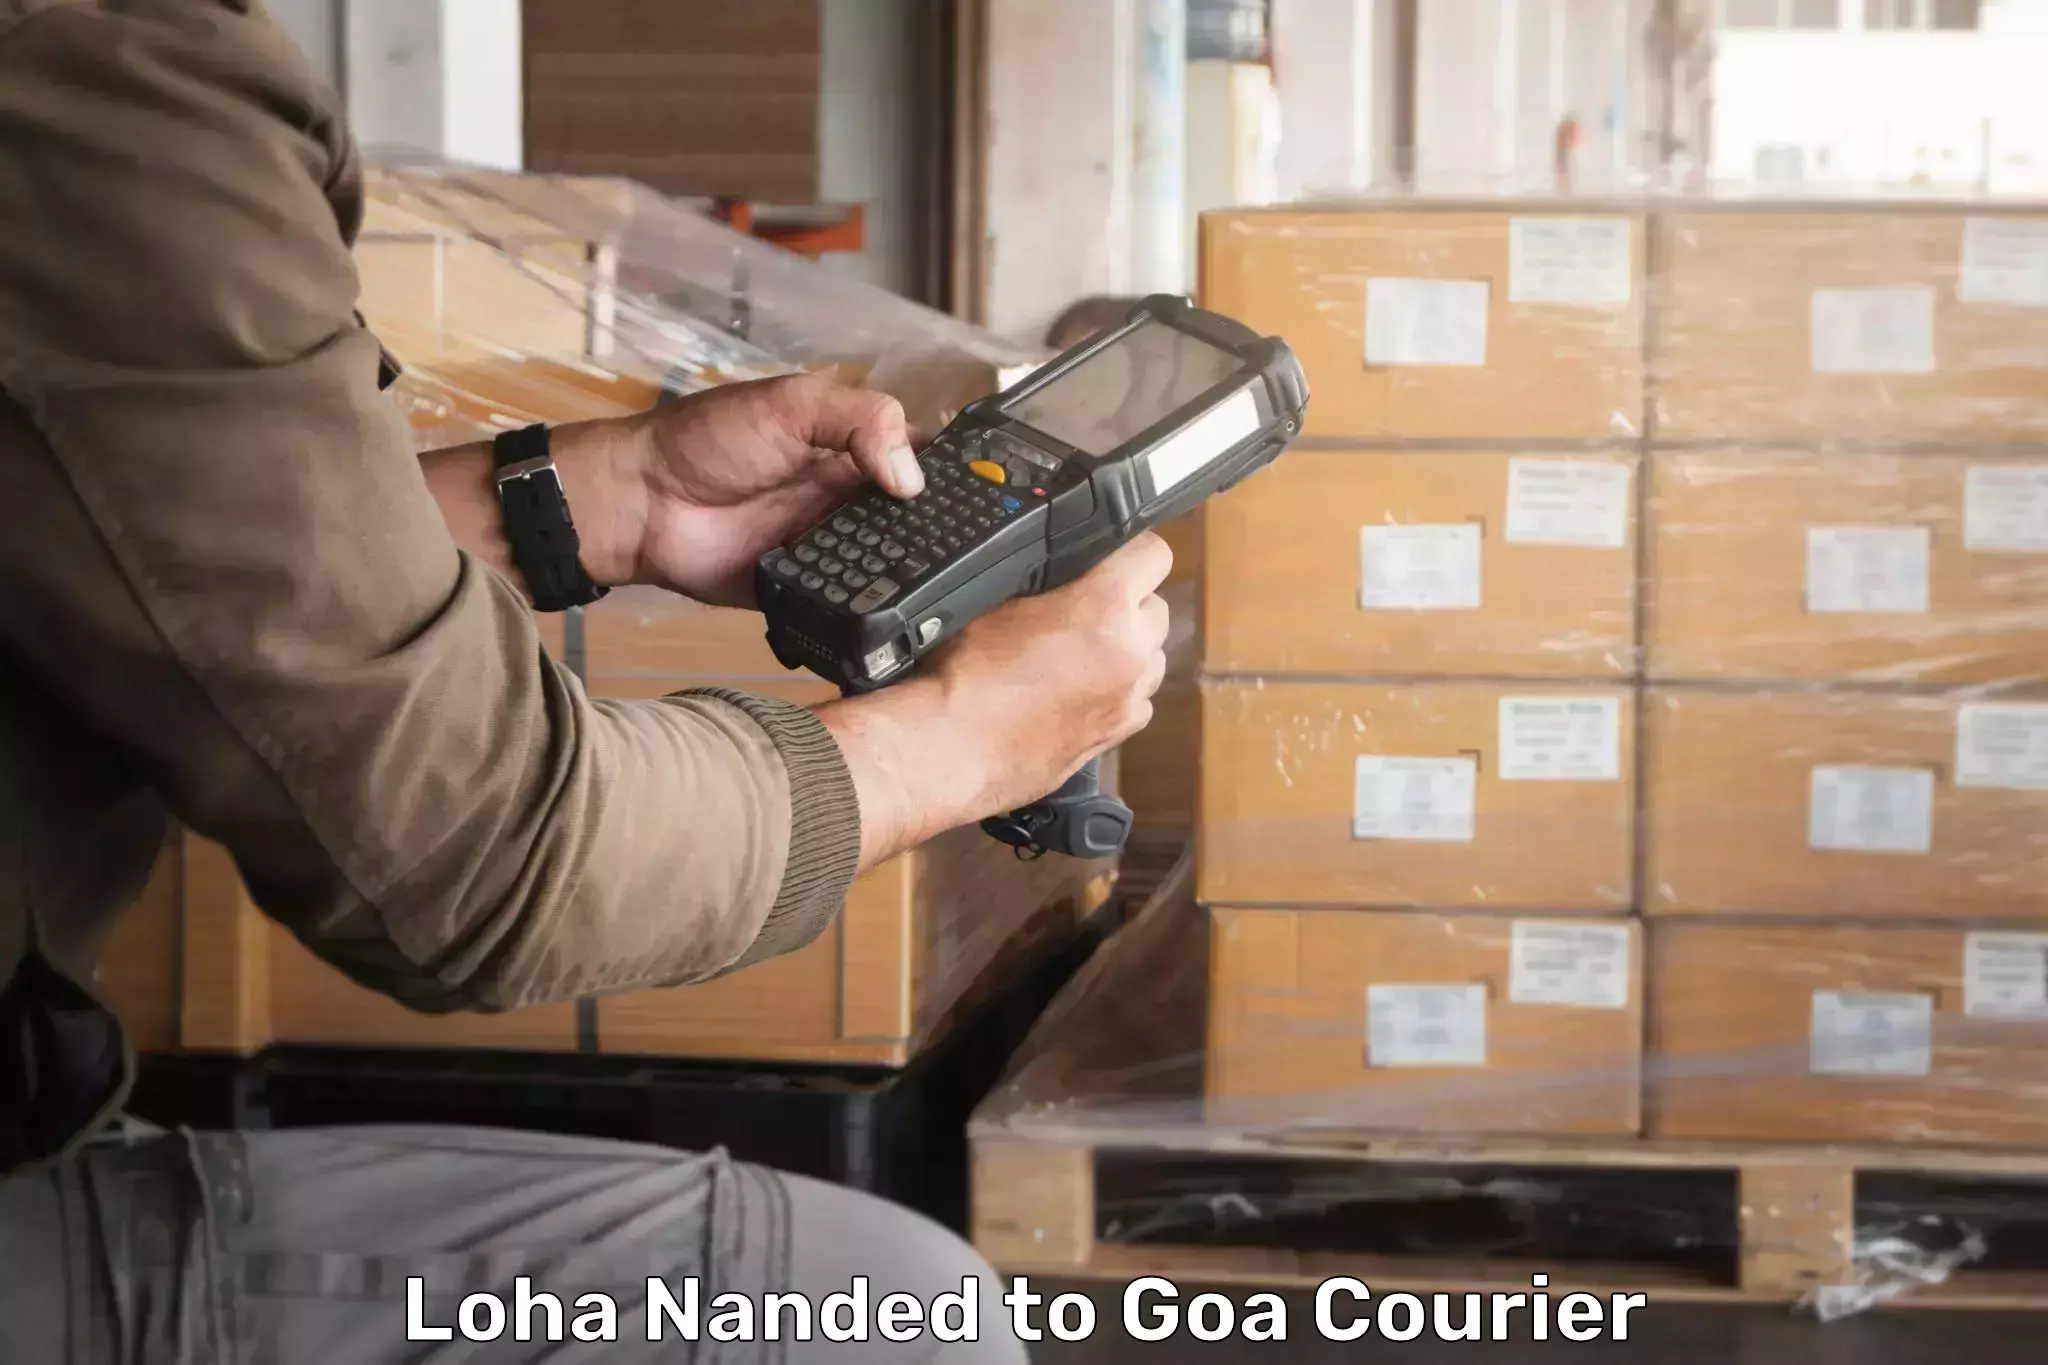 Courier tracking online Loha Nanded to Goa